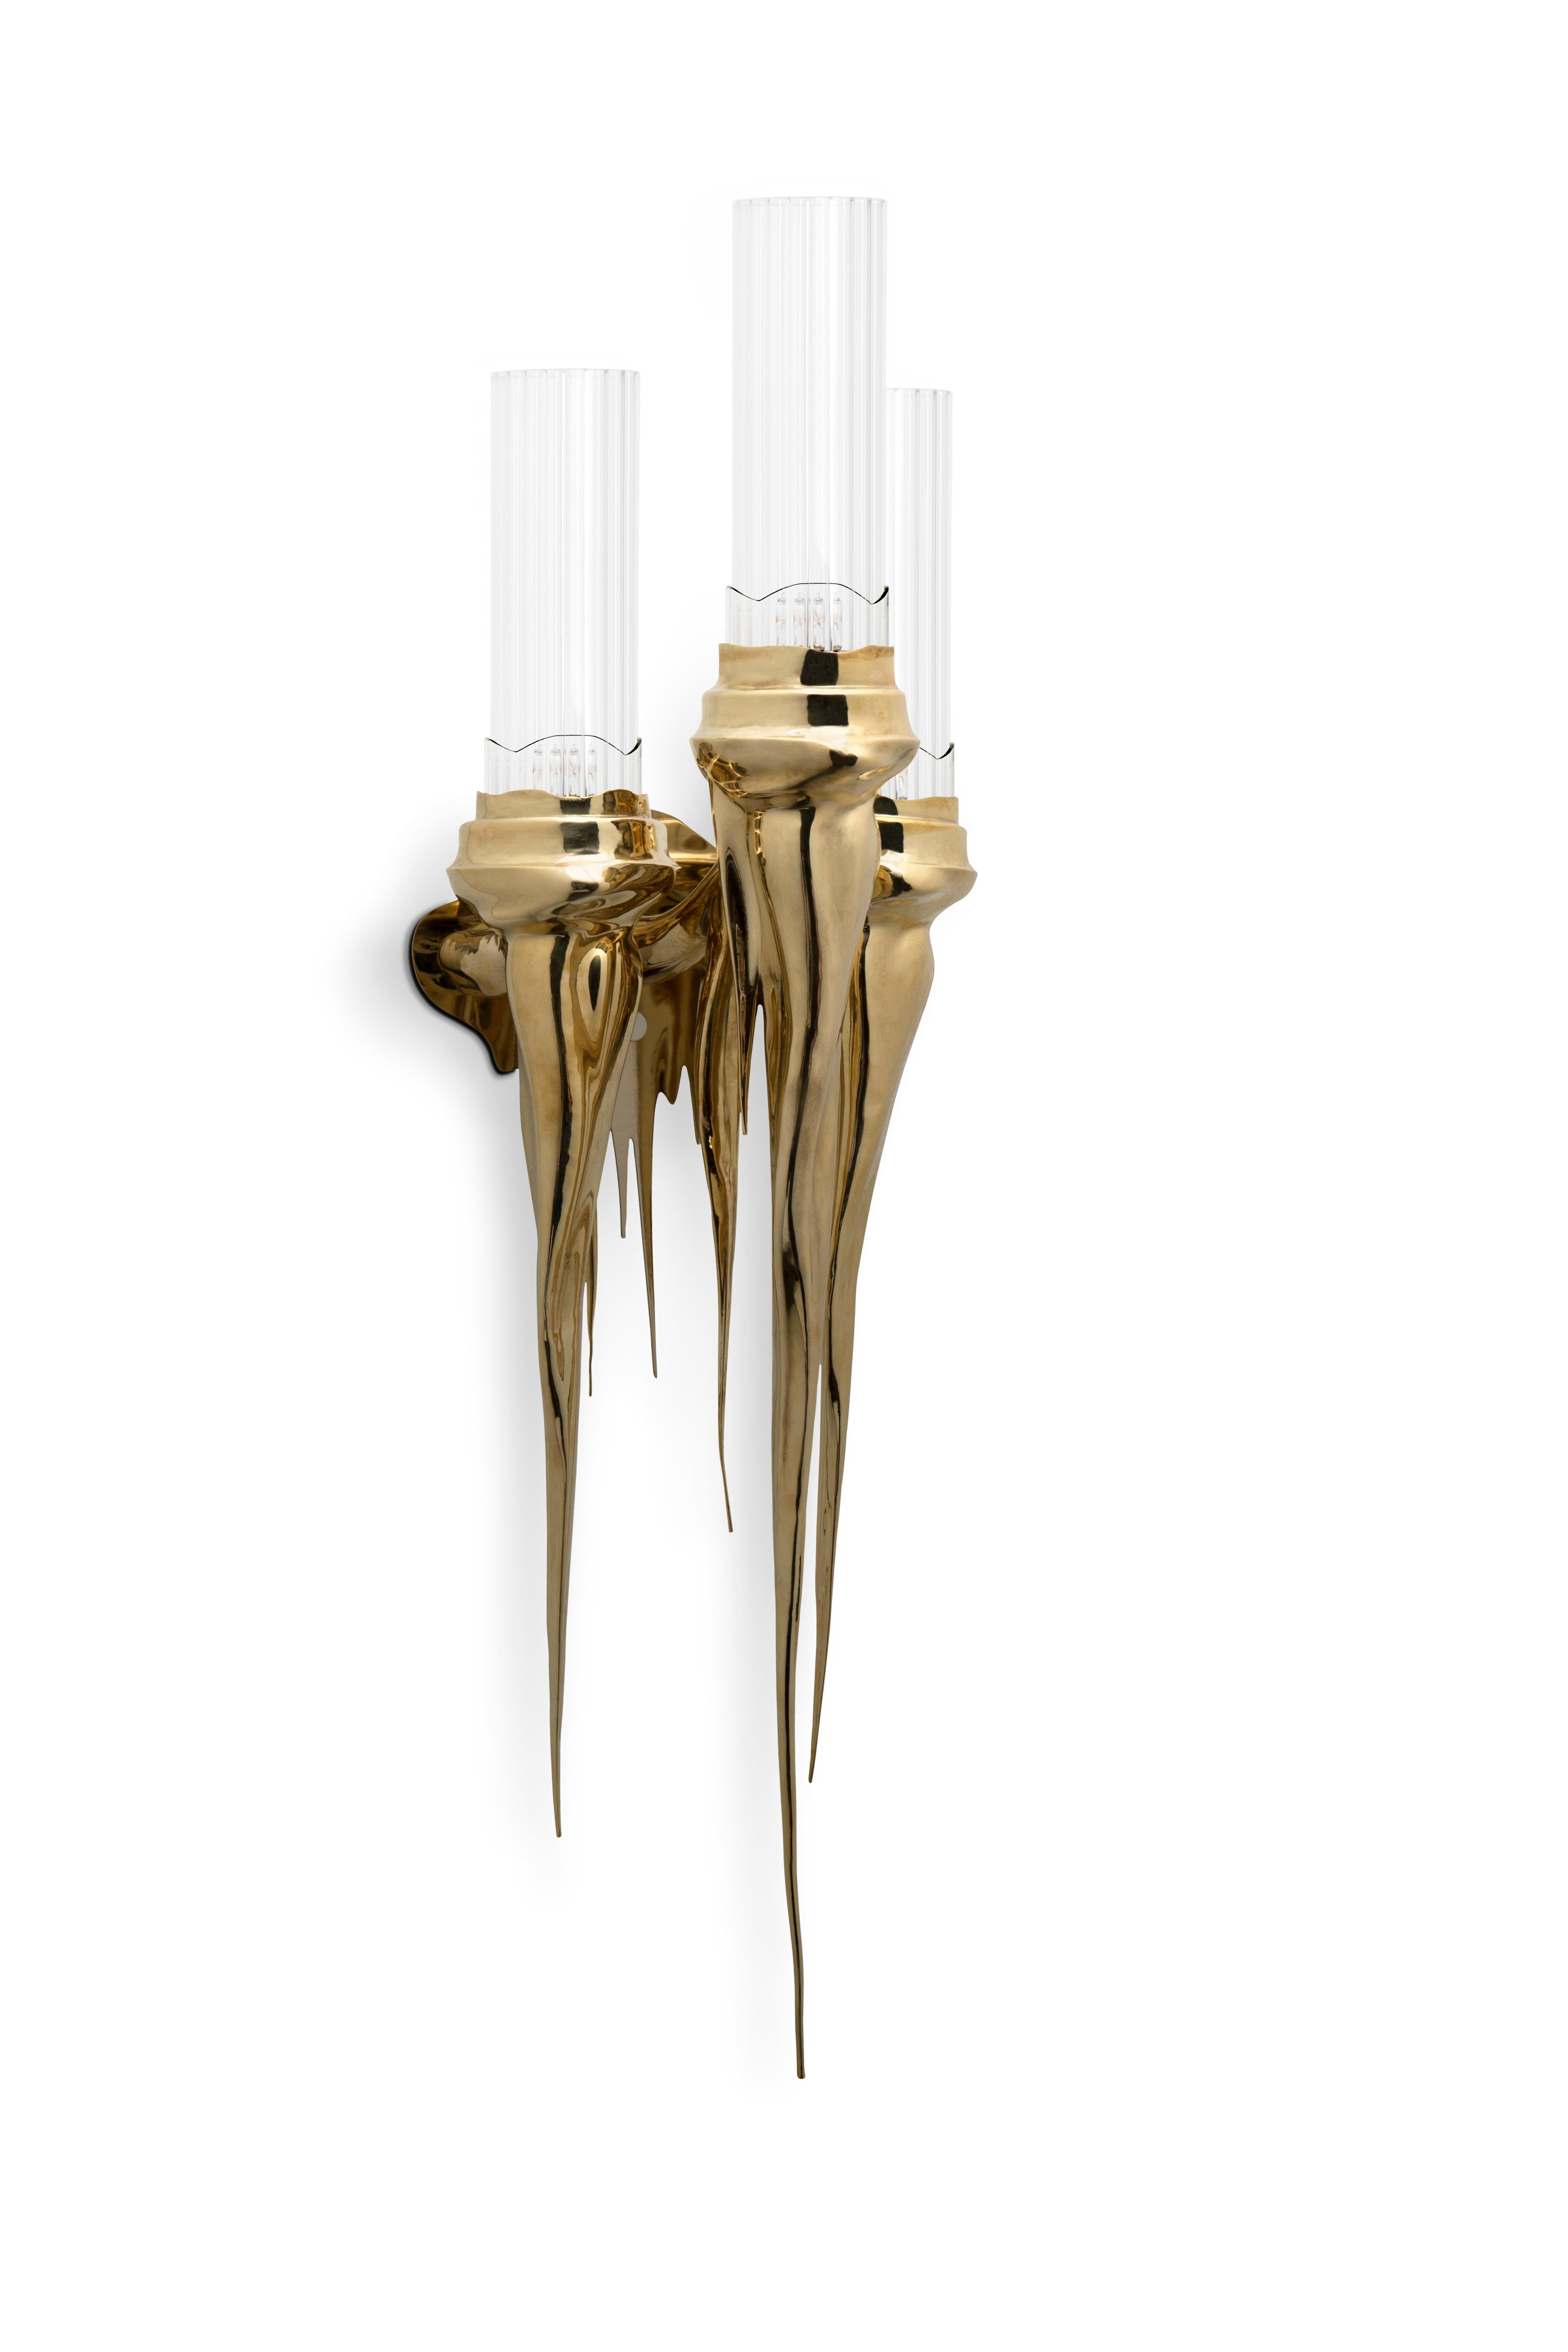 The Wax collection brings an ancient luxury feel, with a contemporaneous variation. This wall fixture fully made of gold plated brass, brings a modern twist to any environment, despite being inspired in ancient times. Composed of several fine tubes